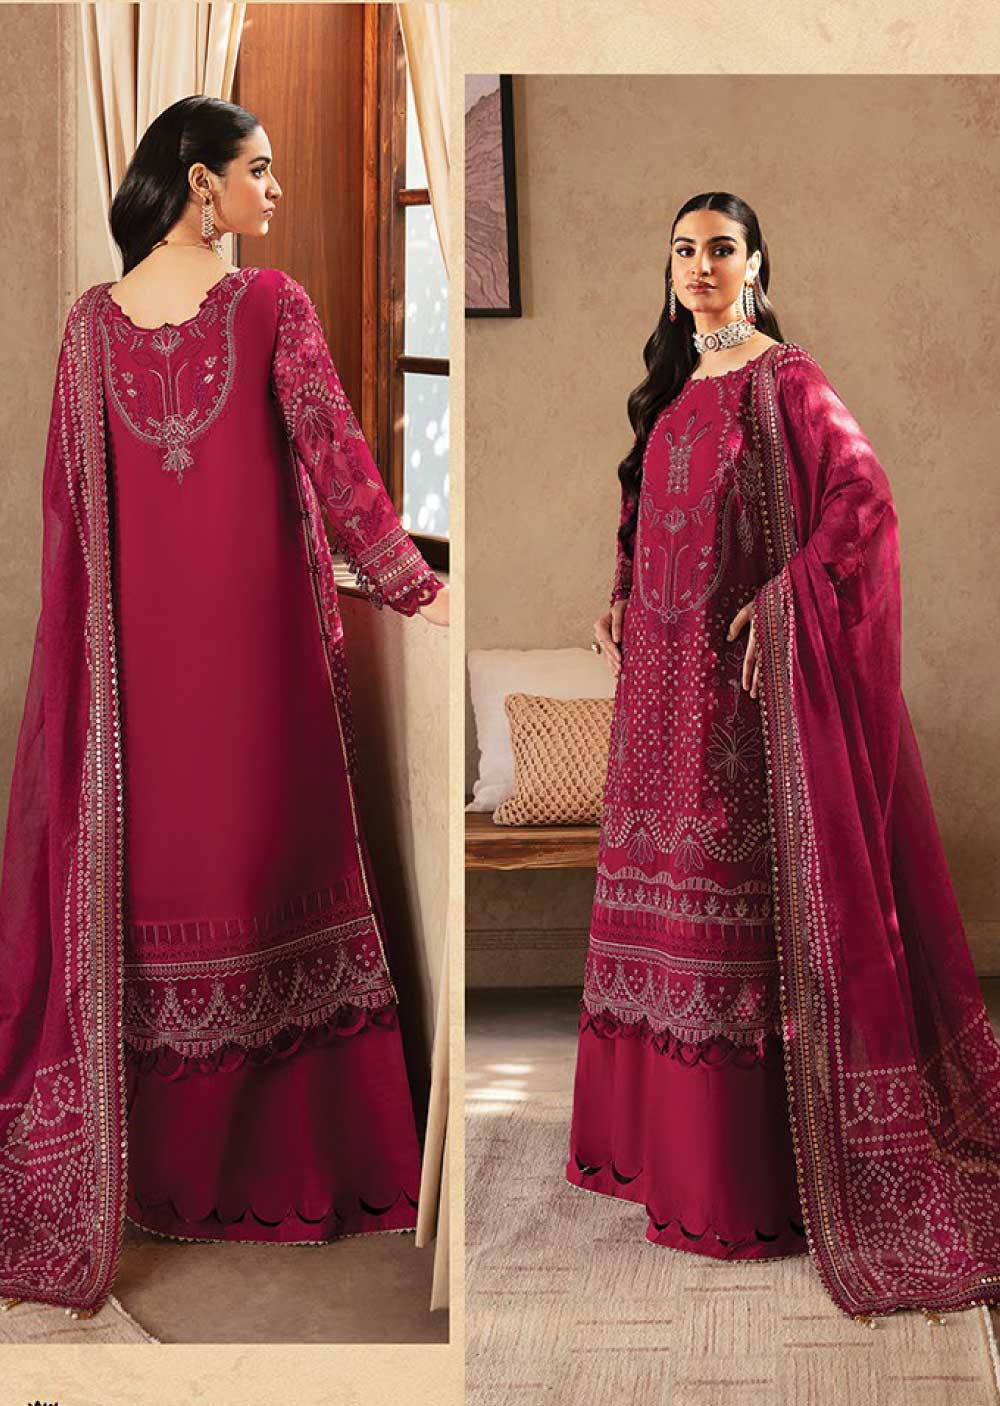 Sarama - Unstitched - Yesfir Collection by Xenia Formals 2024 - Memsaab Online